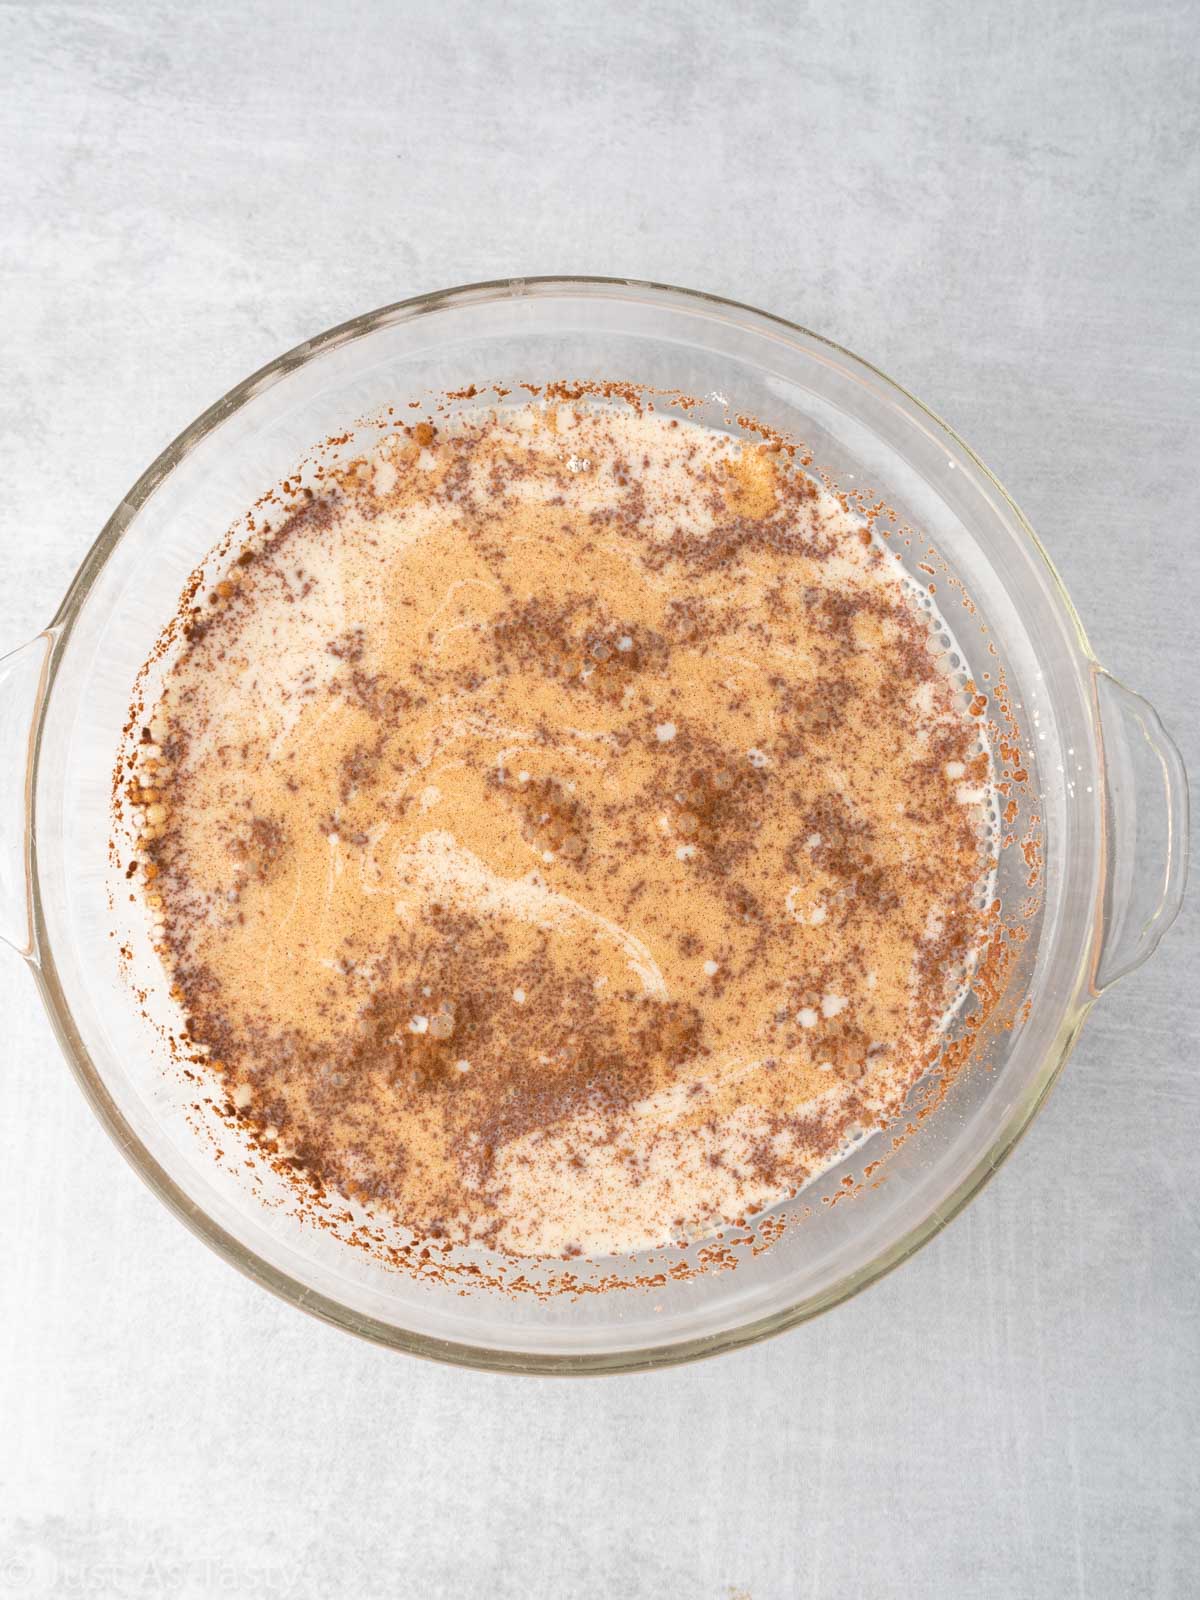 Milk and cinnamon mixture in a glass dish.